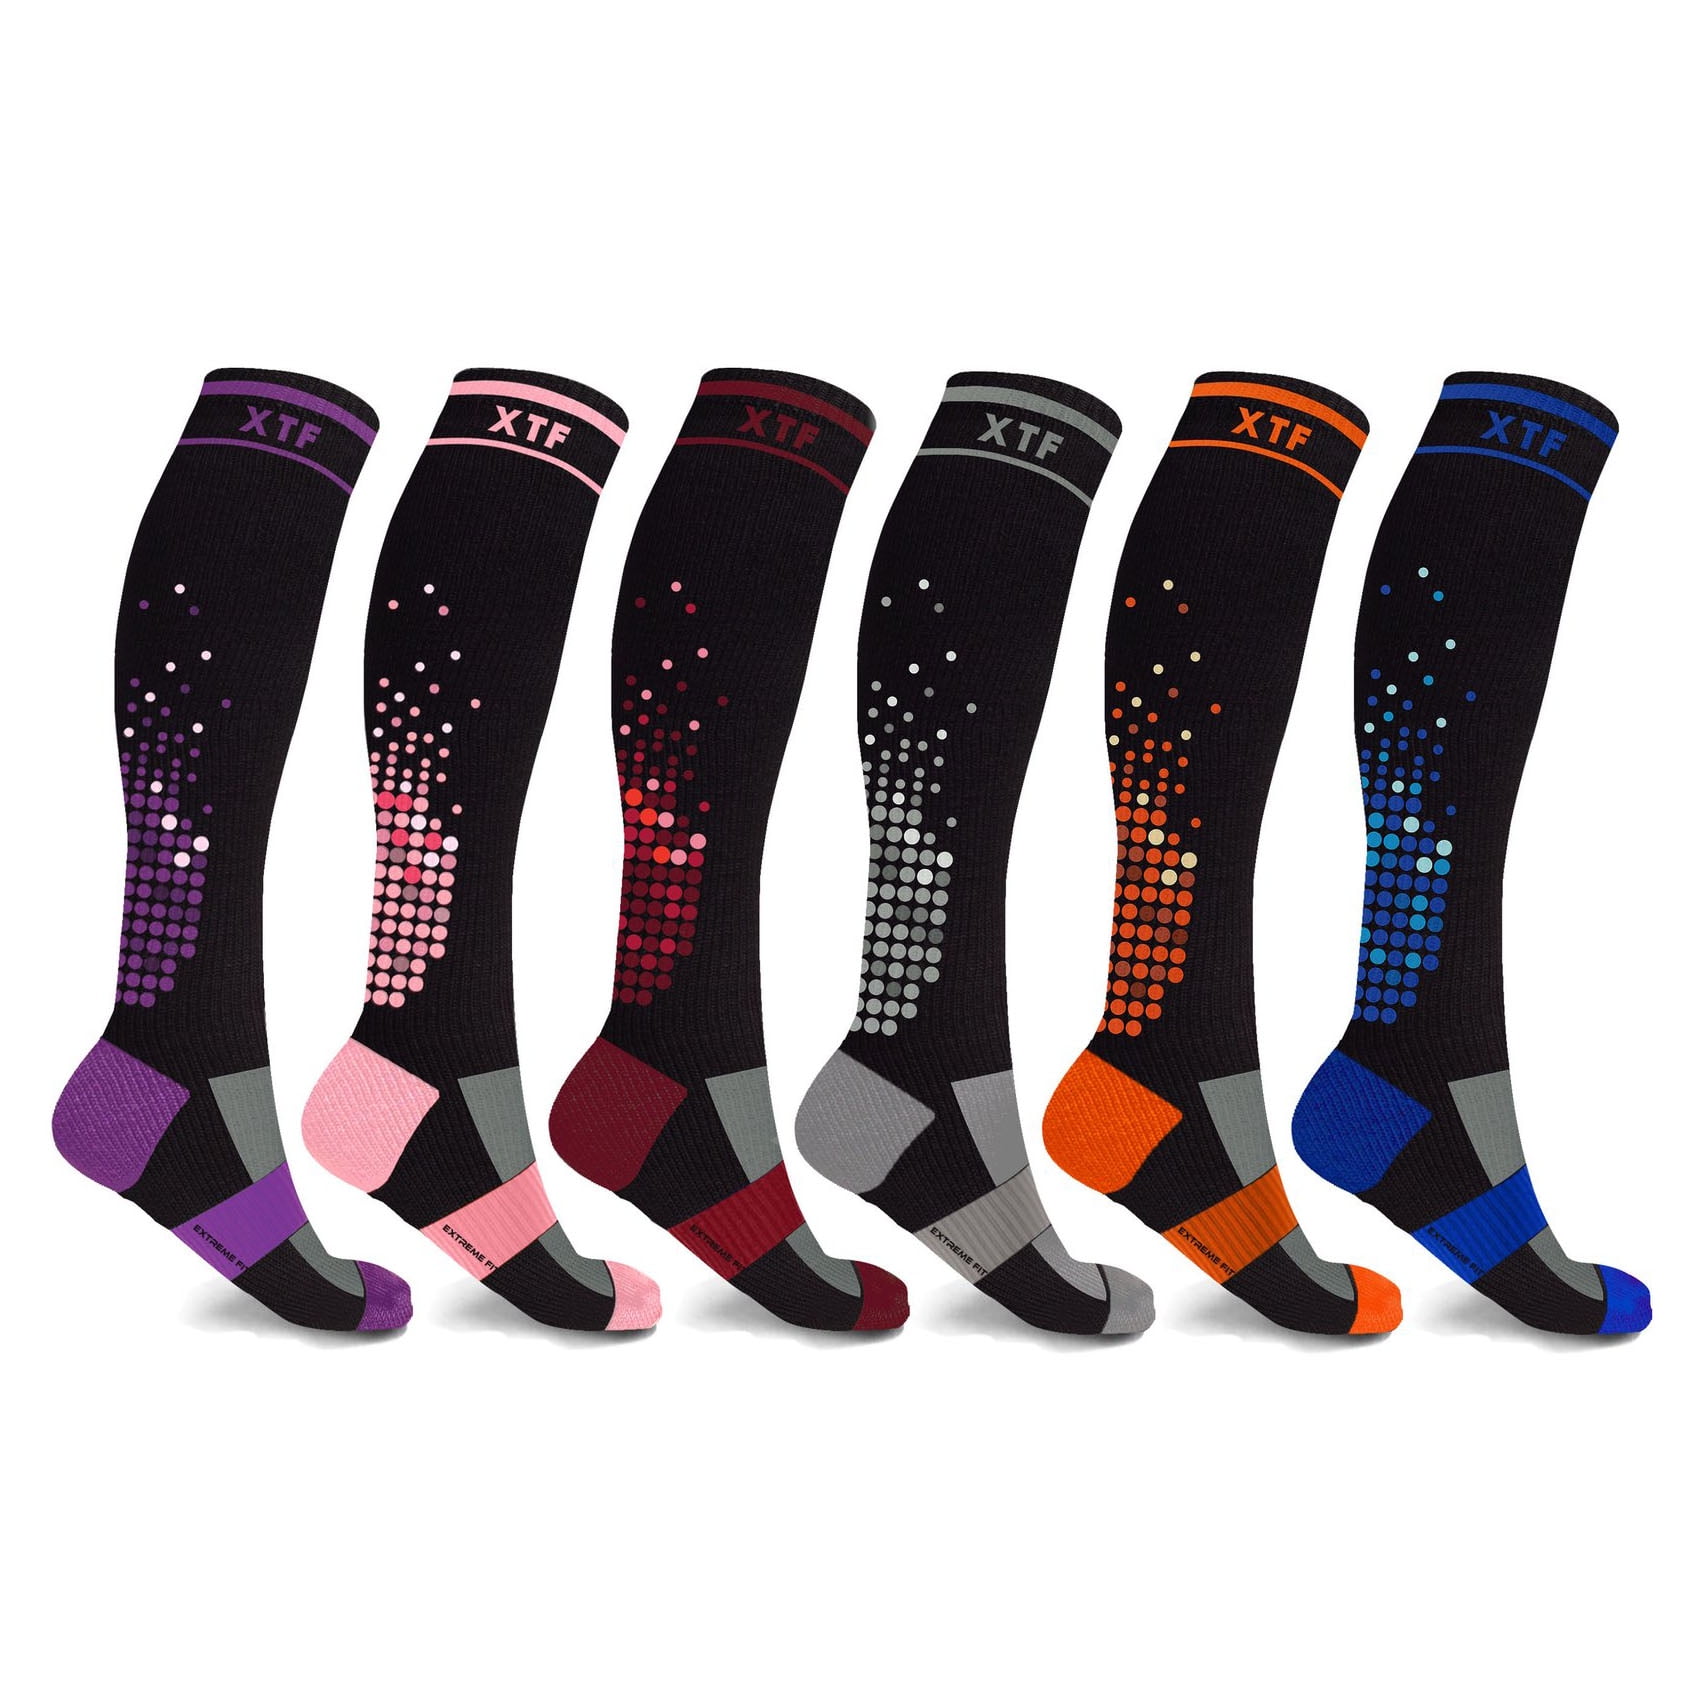 Cool Multicolor Energy Compression Socks - 3 Pair at Copper Fit USA®